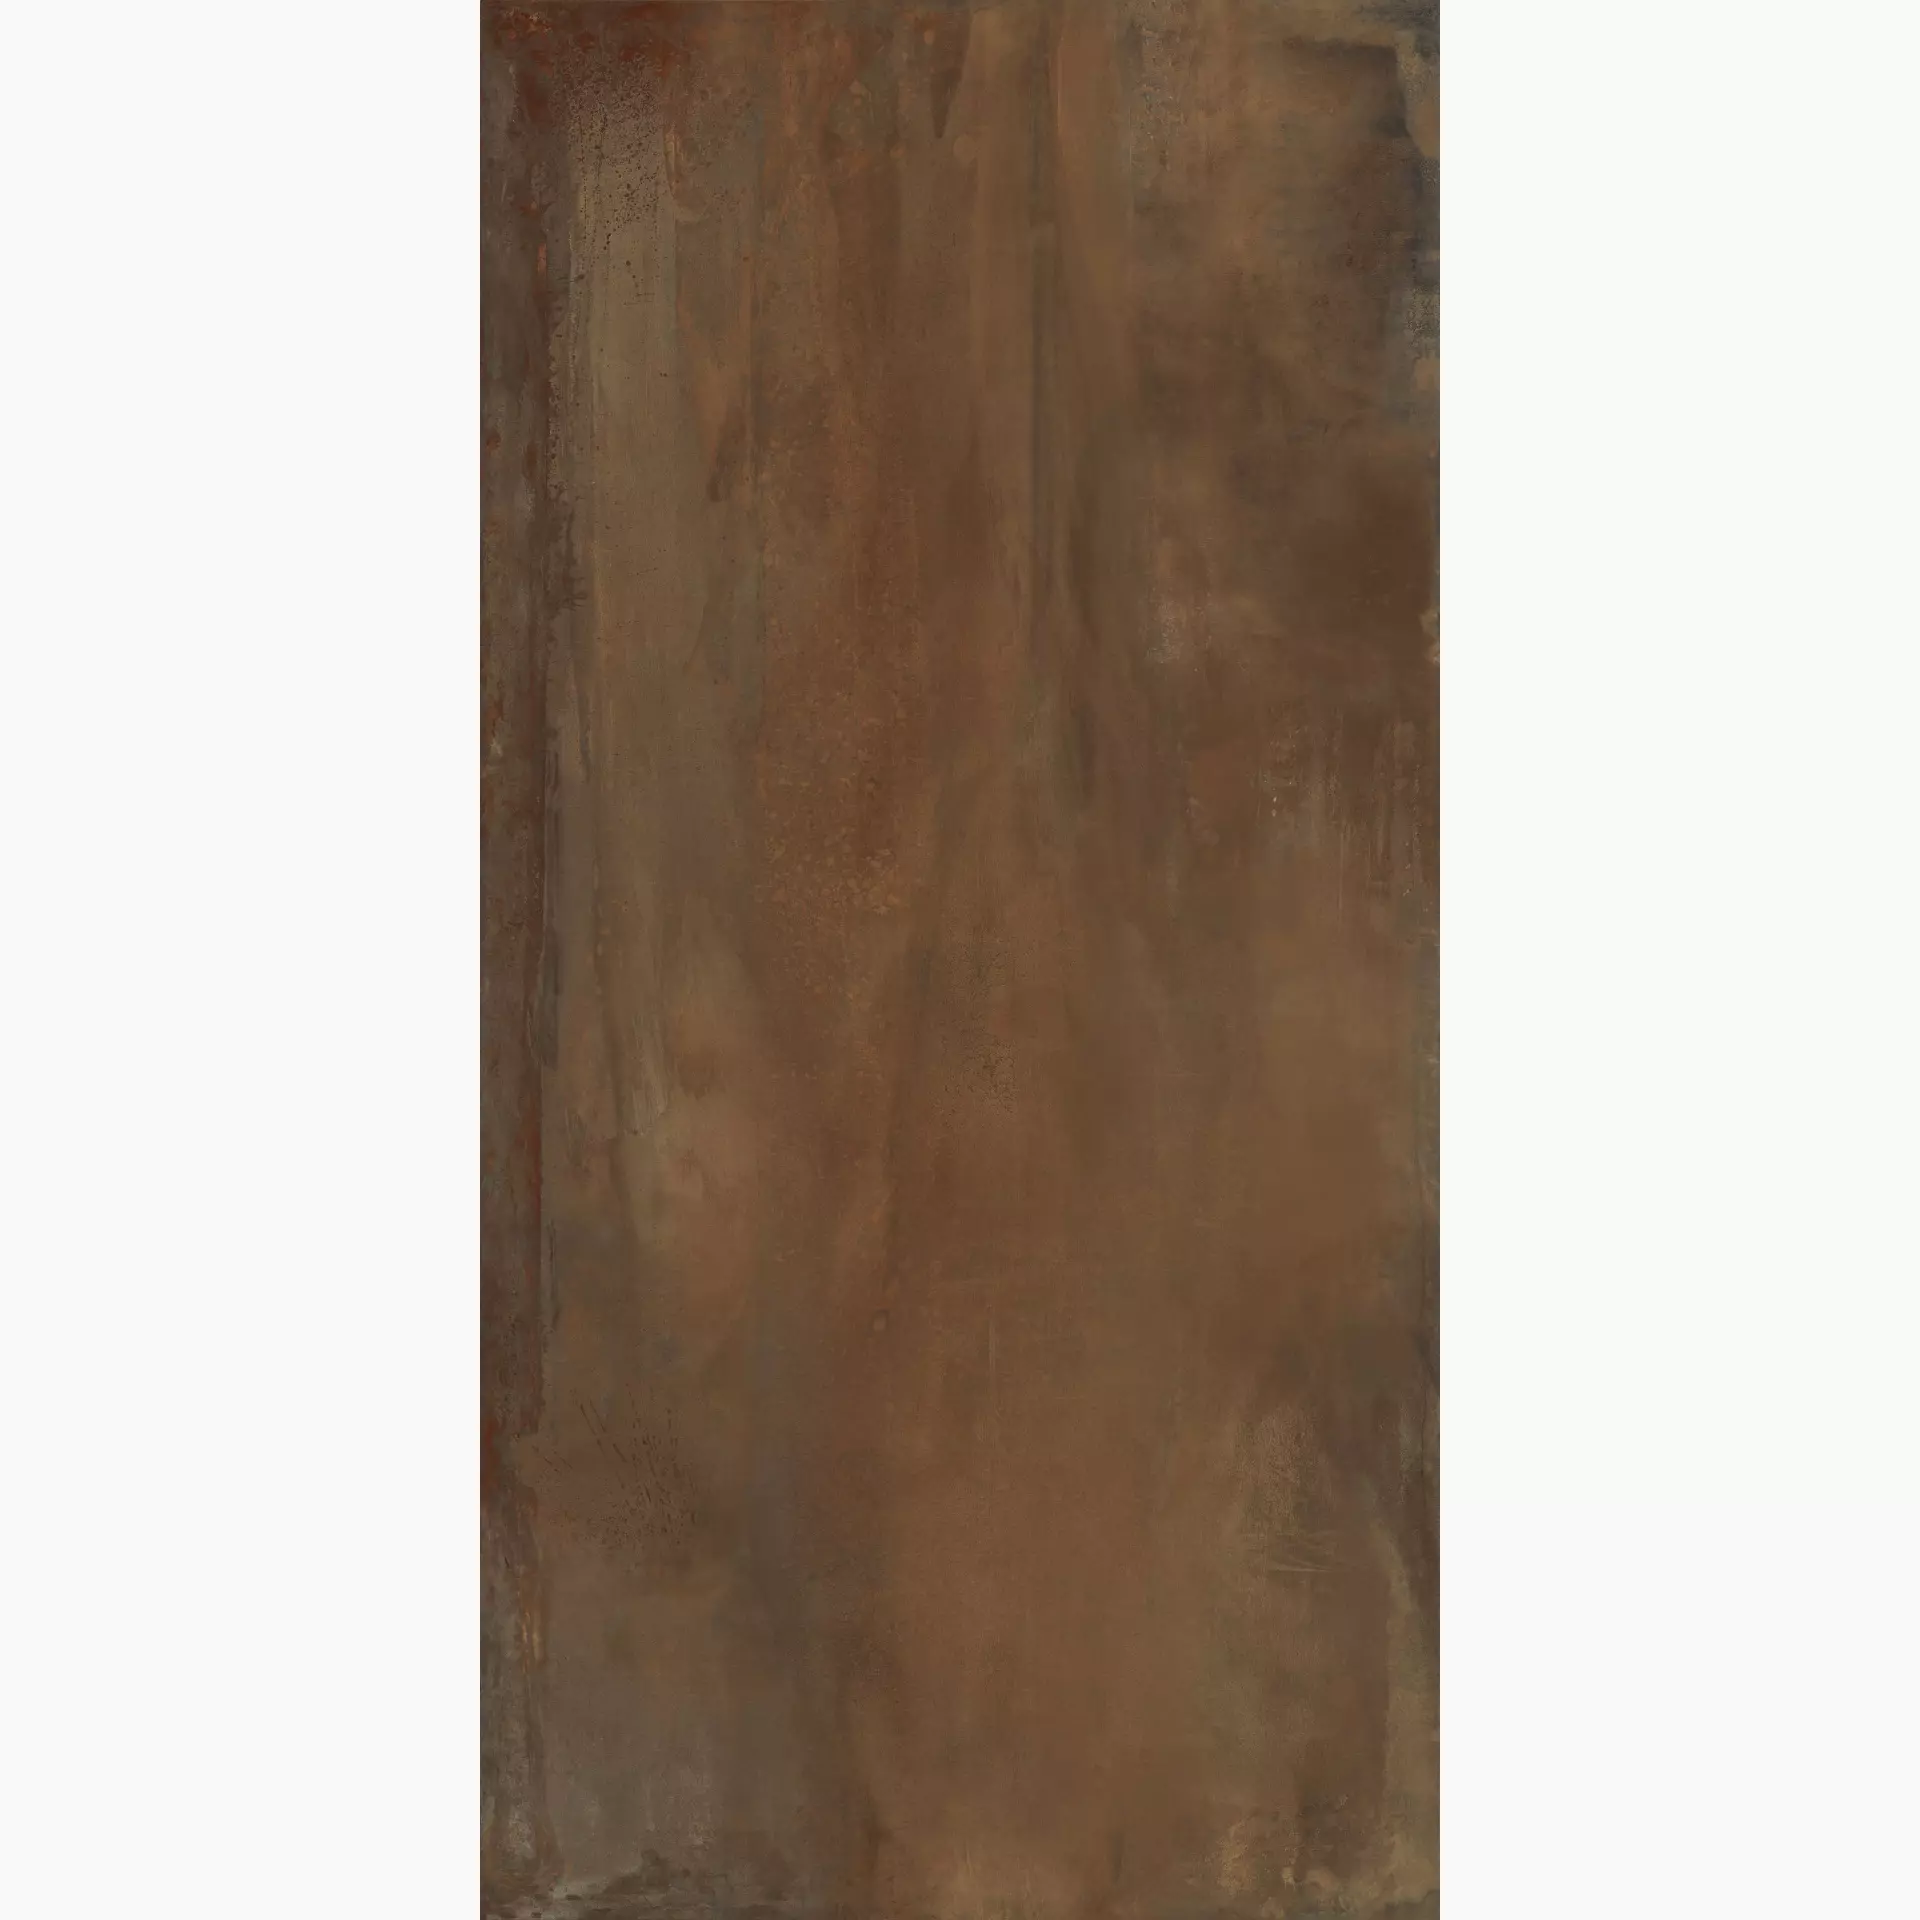 ABK Interno9 Wide Rust Naturale PF60000299 160x320cm rectified 6mm